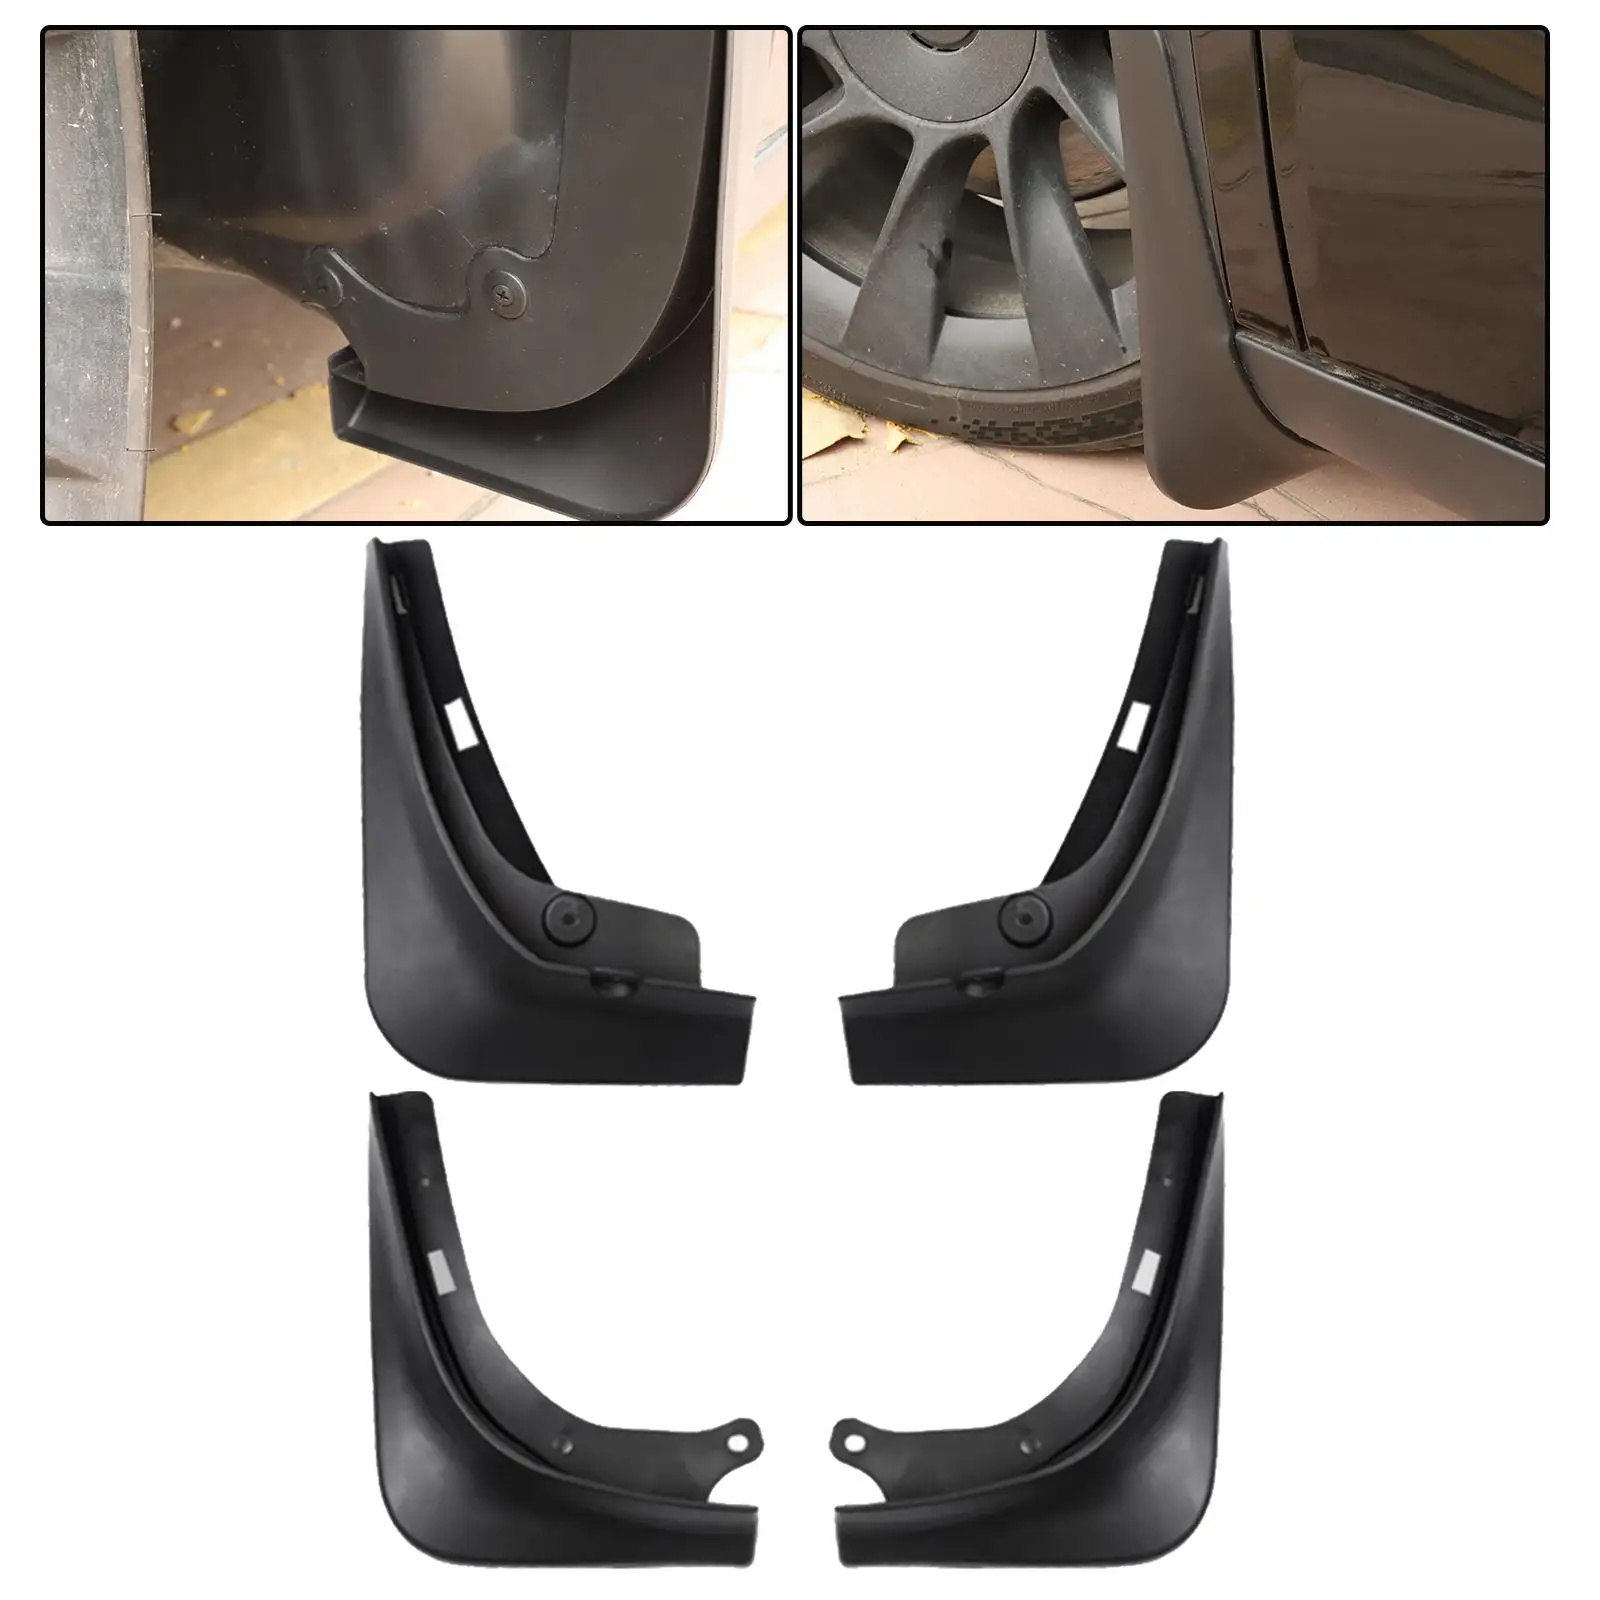 Car Wheel Flaps Front Rear Wheel Mudflaps for  No Need Drilling Holes